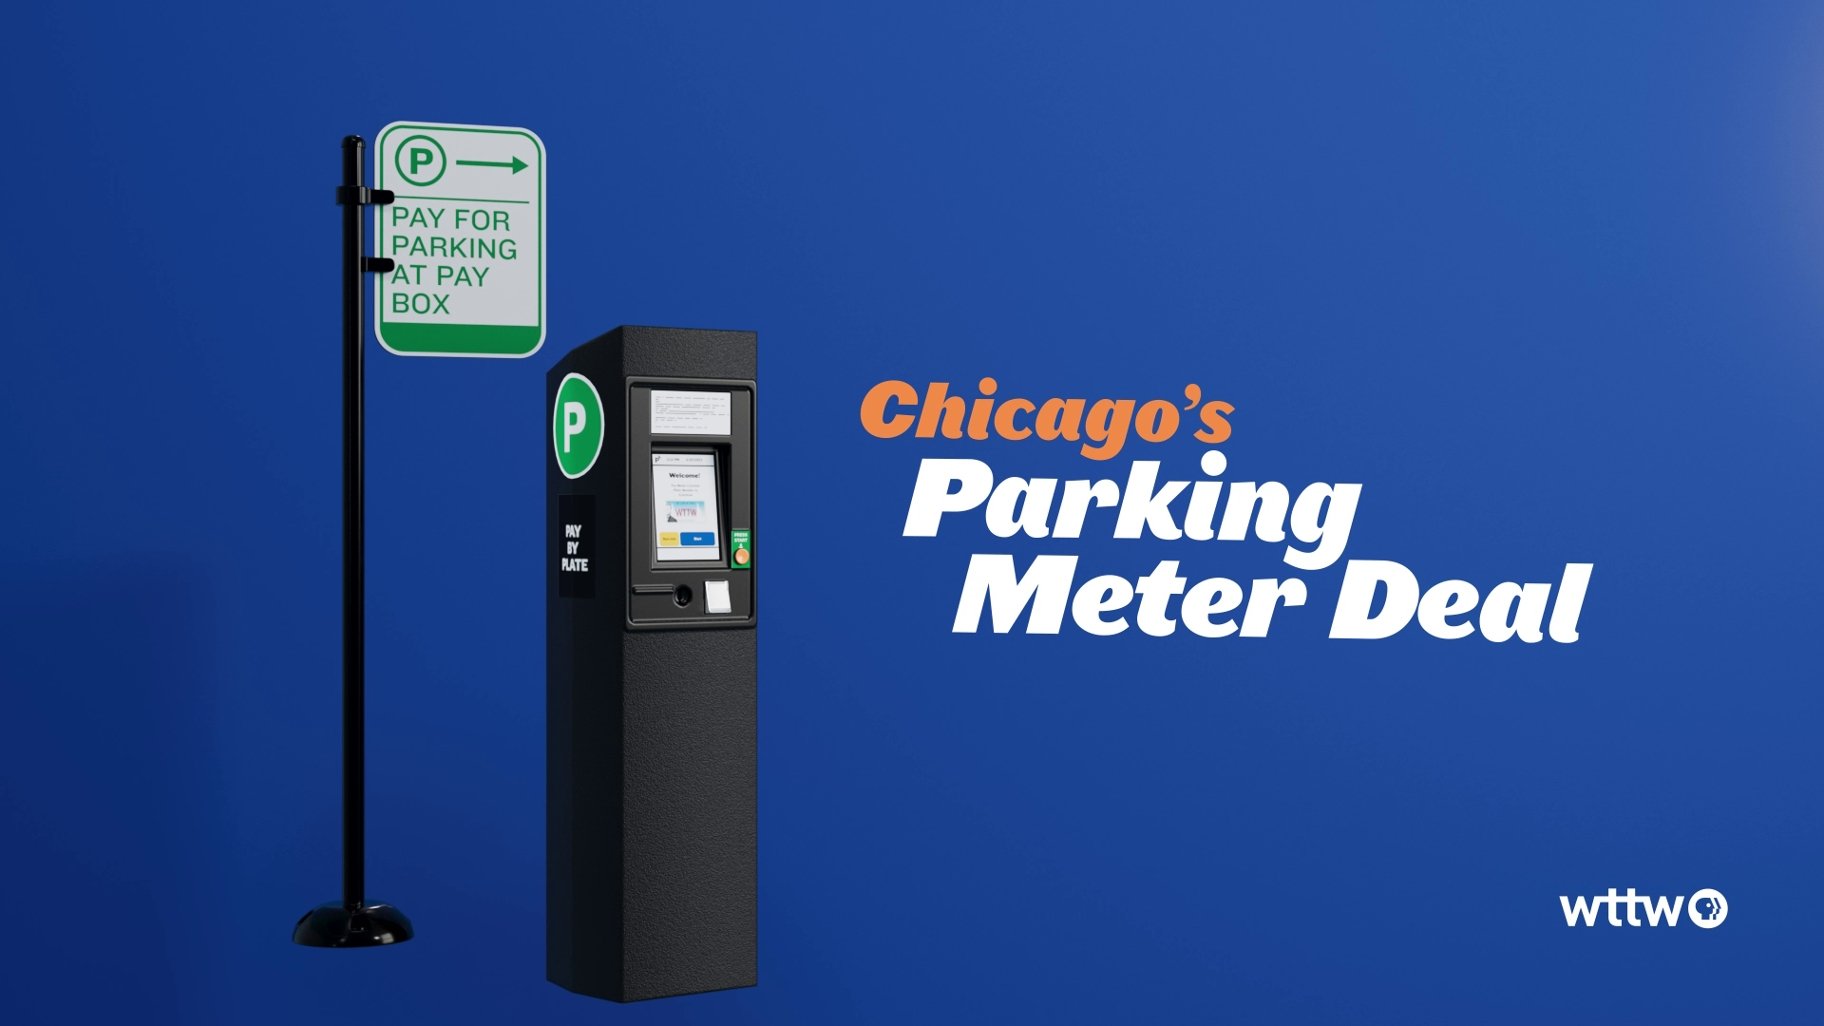 Lawsuit: 75-year Chicago parking meter deal is a monopoly